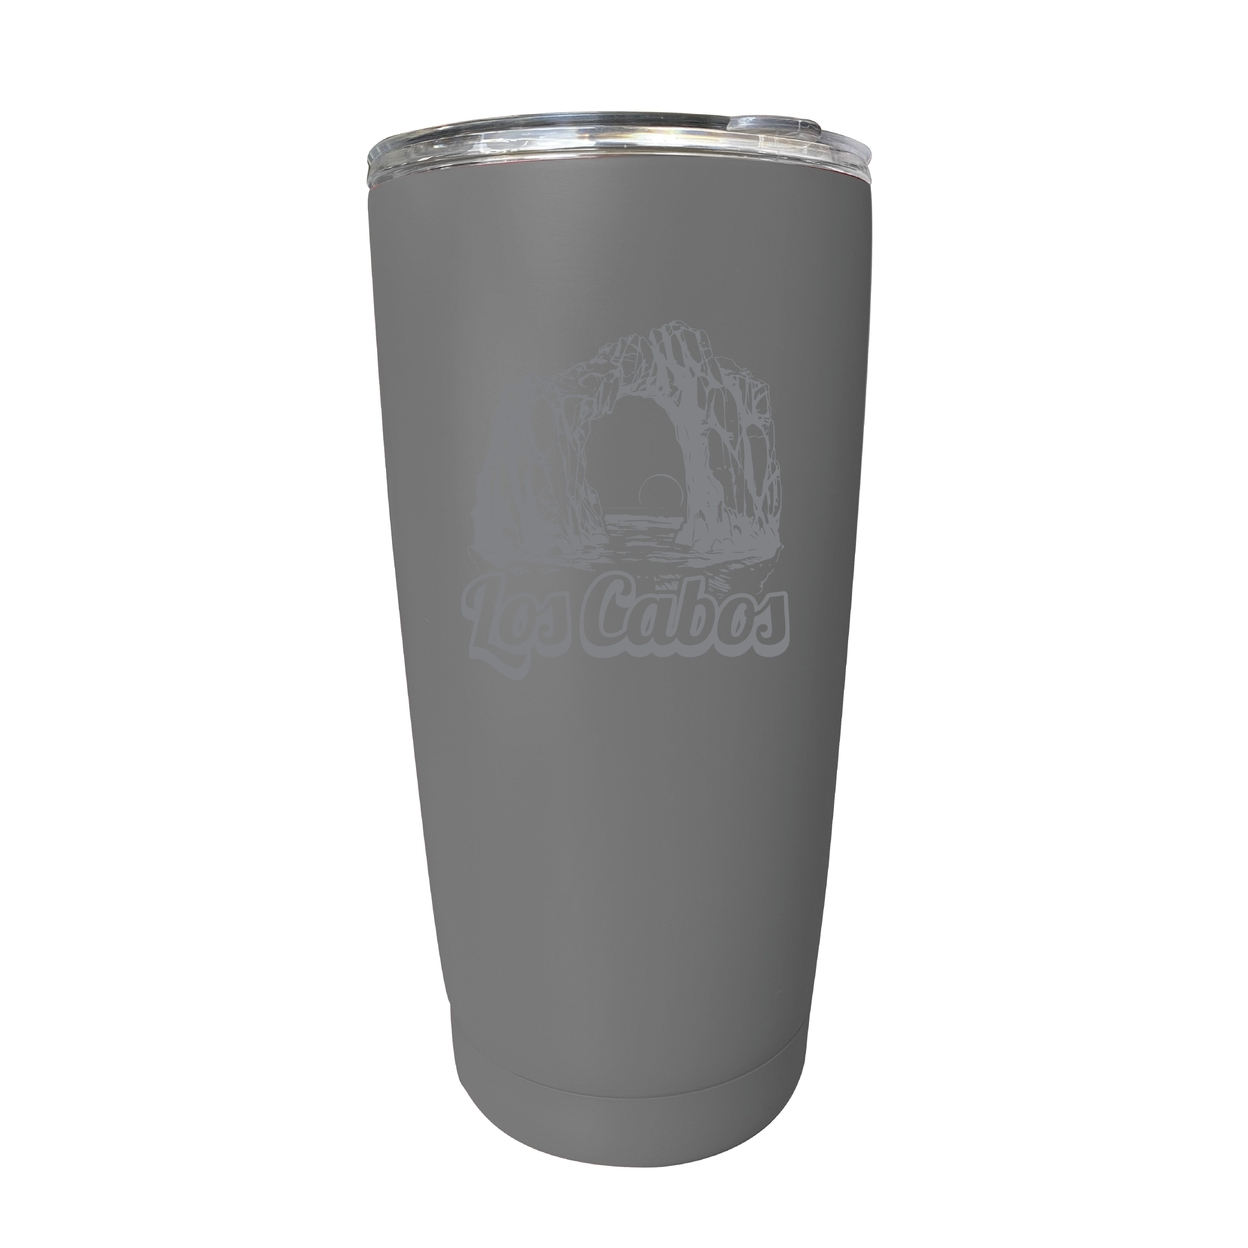 Los Cabos Mexico Souvenir 16 Oz Engraved Stainless Steel Insulated Tumbler - Gray,,Single Unit